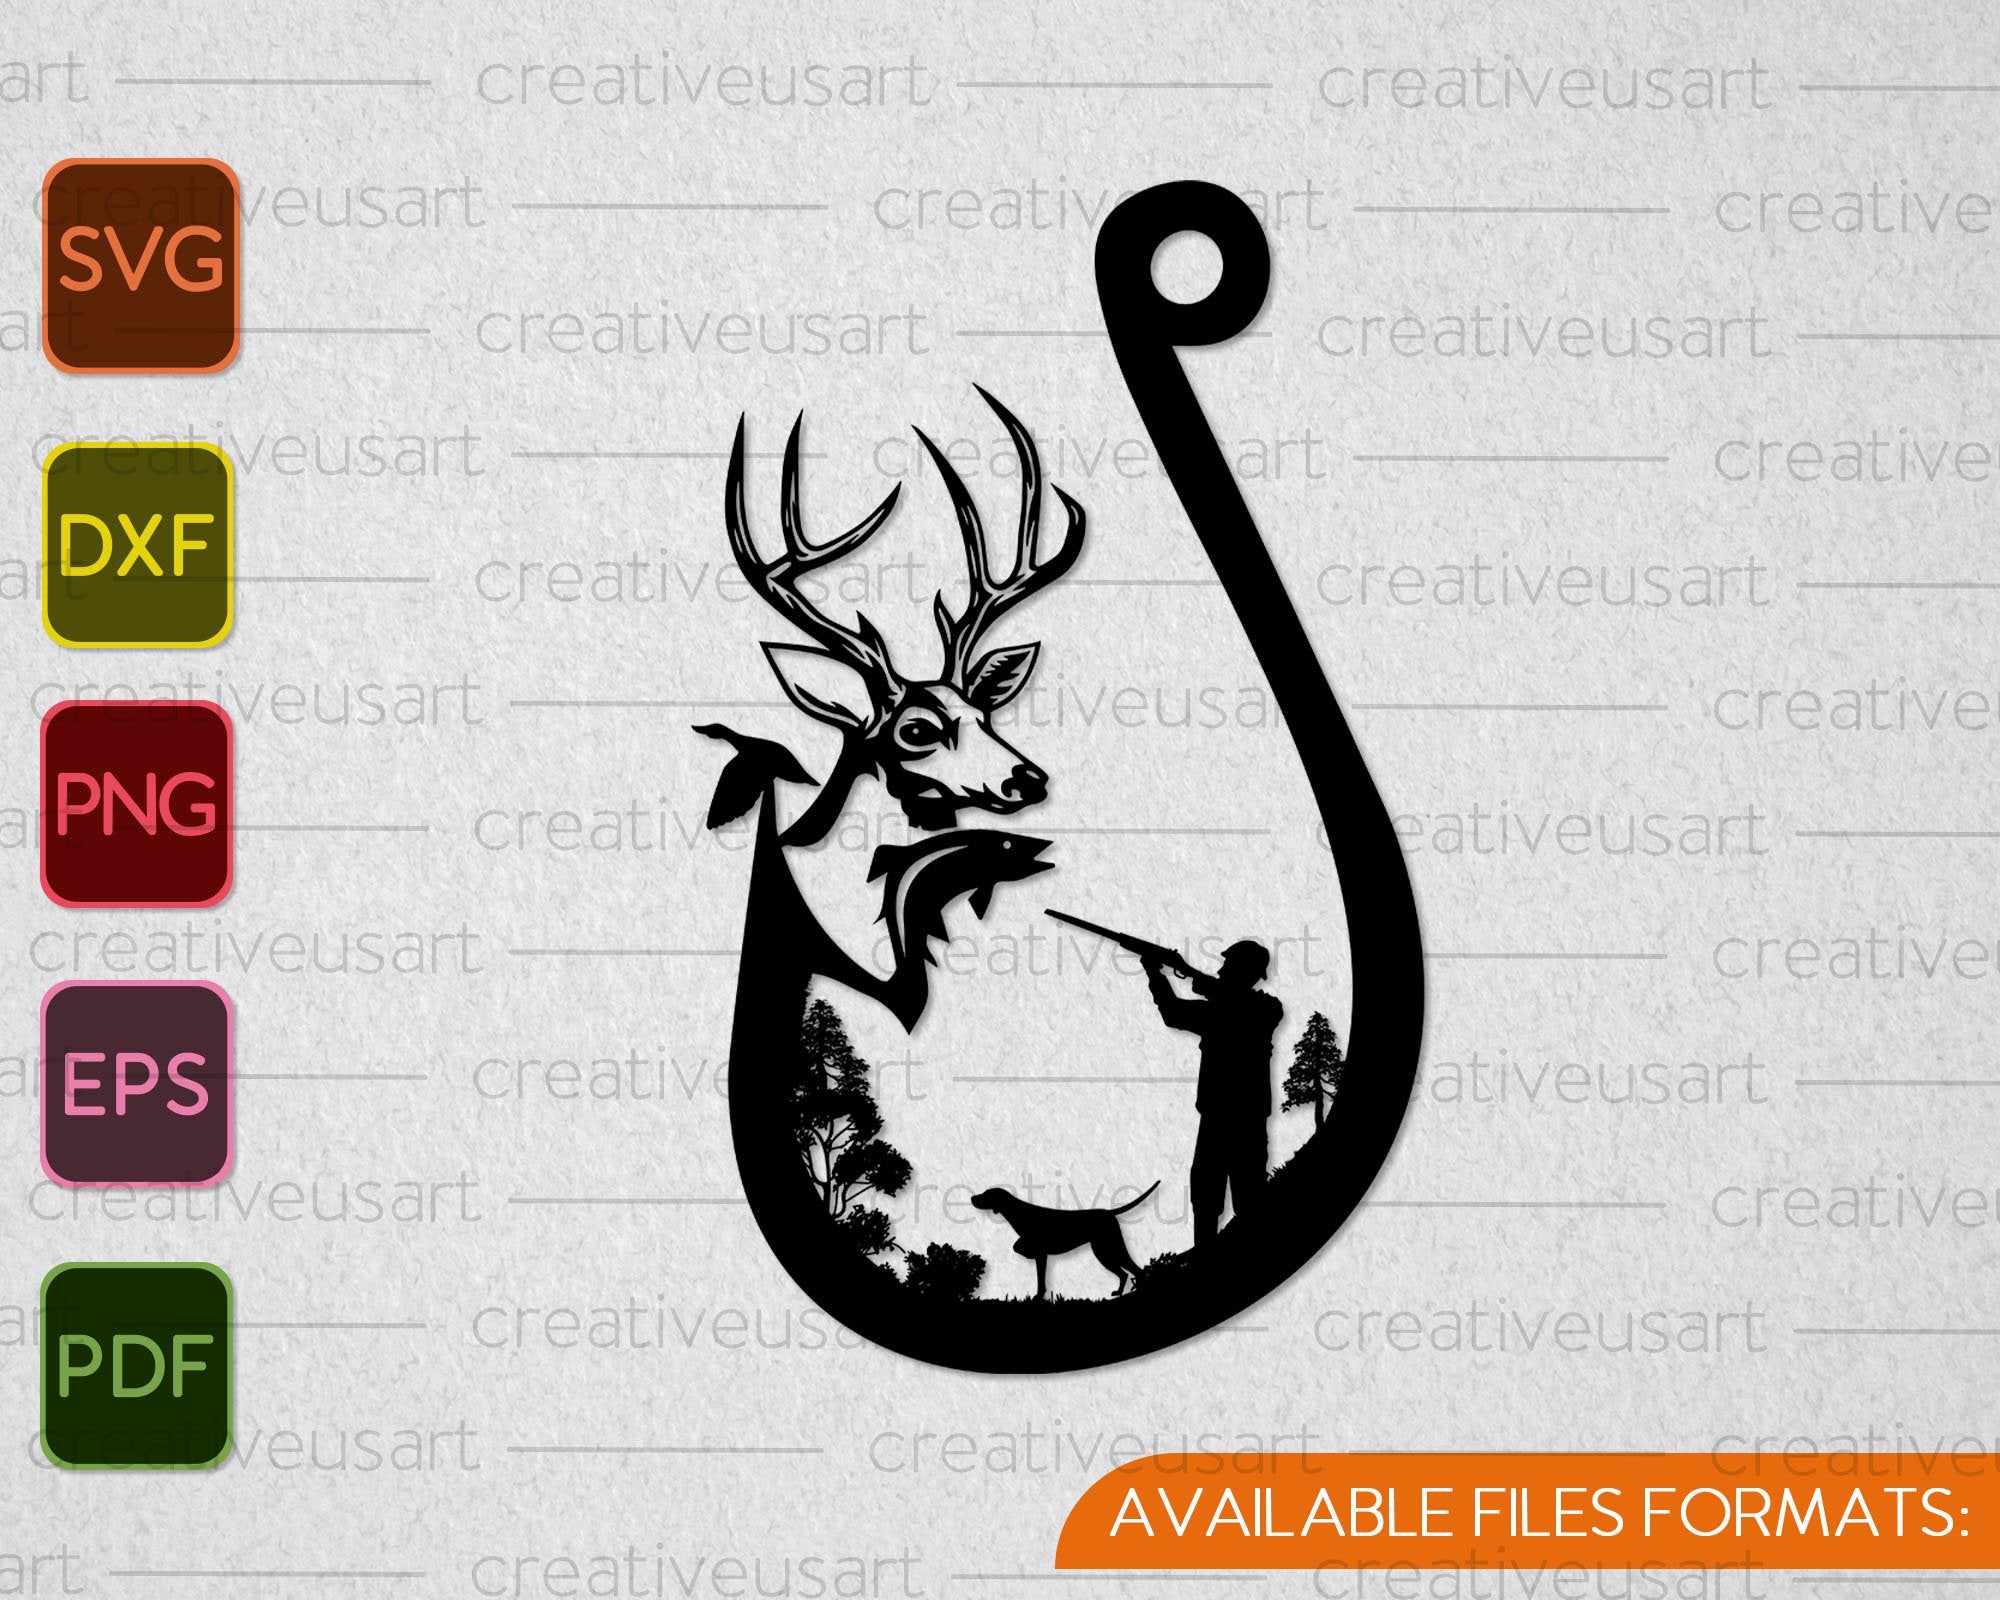 Download Deer And Hook Svg File Hunting And Fishing Svg File Hunting Fishing Duck Vector Clip Art Cricut Silhouette Cameo Vinyl Cut Visual Arts Craft Supplies Tools Kromasol Com